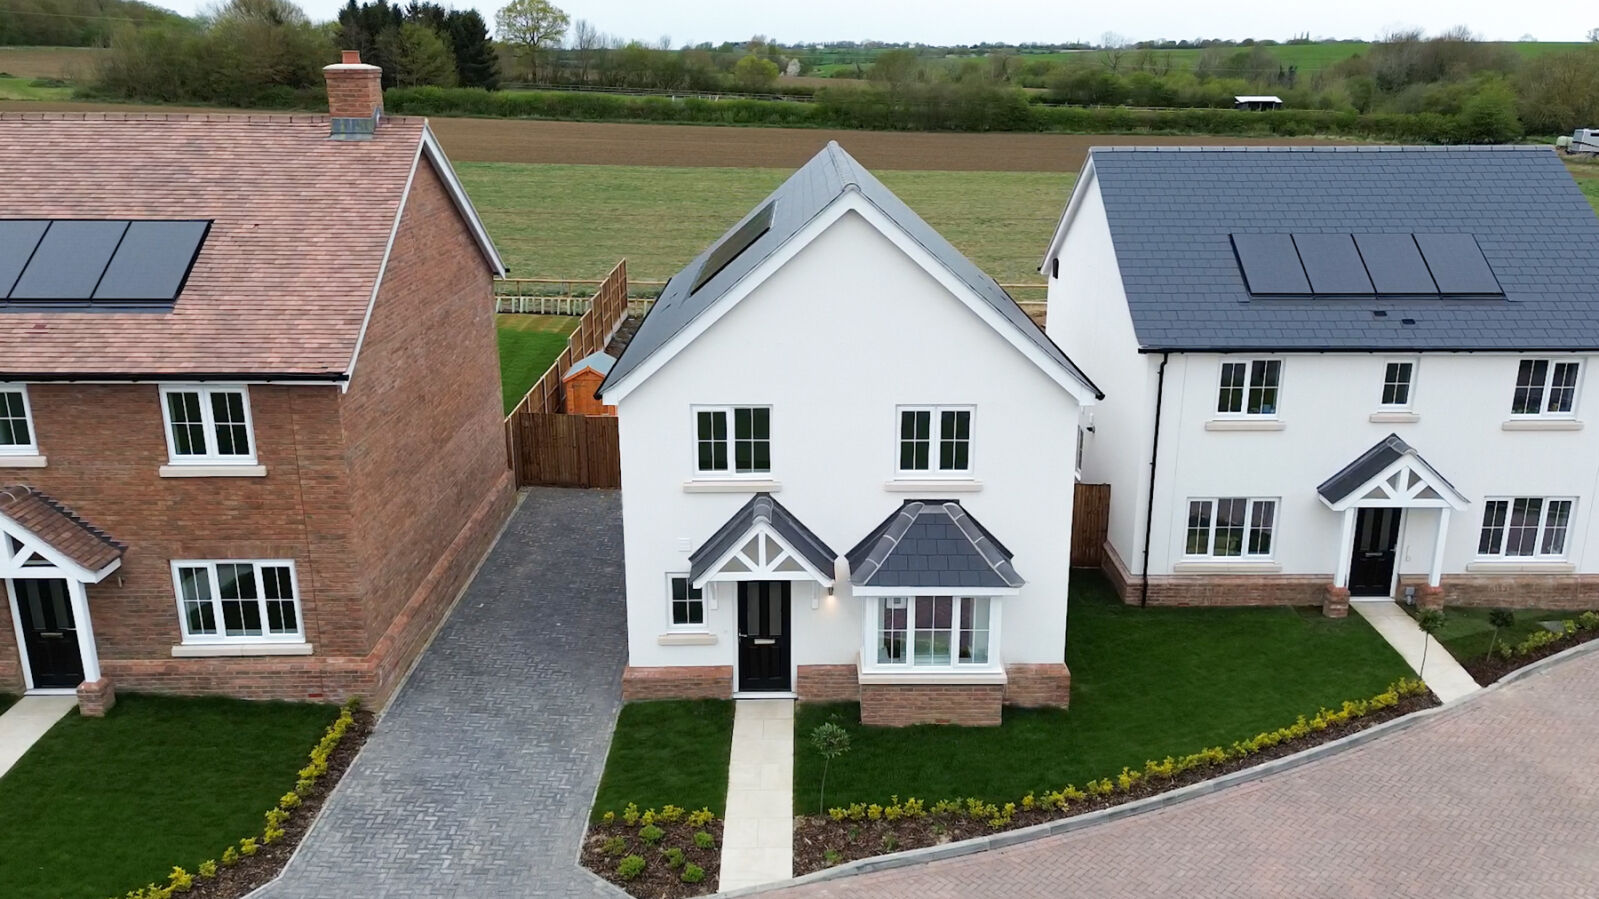 4 bedroom detached house for sale Water Lane, Field View, Steeple Bumpstead, CB9, main image